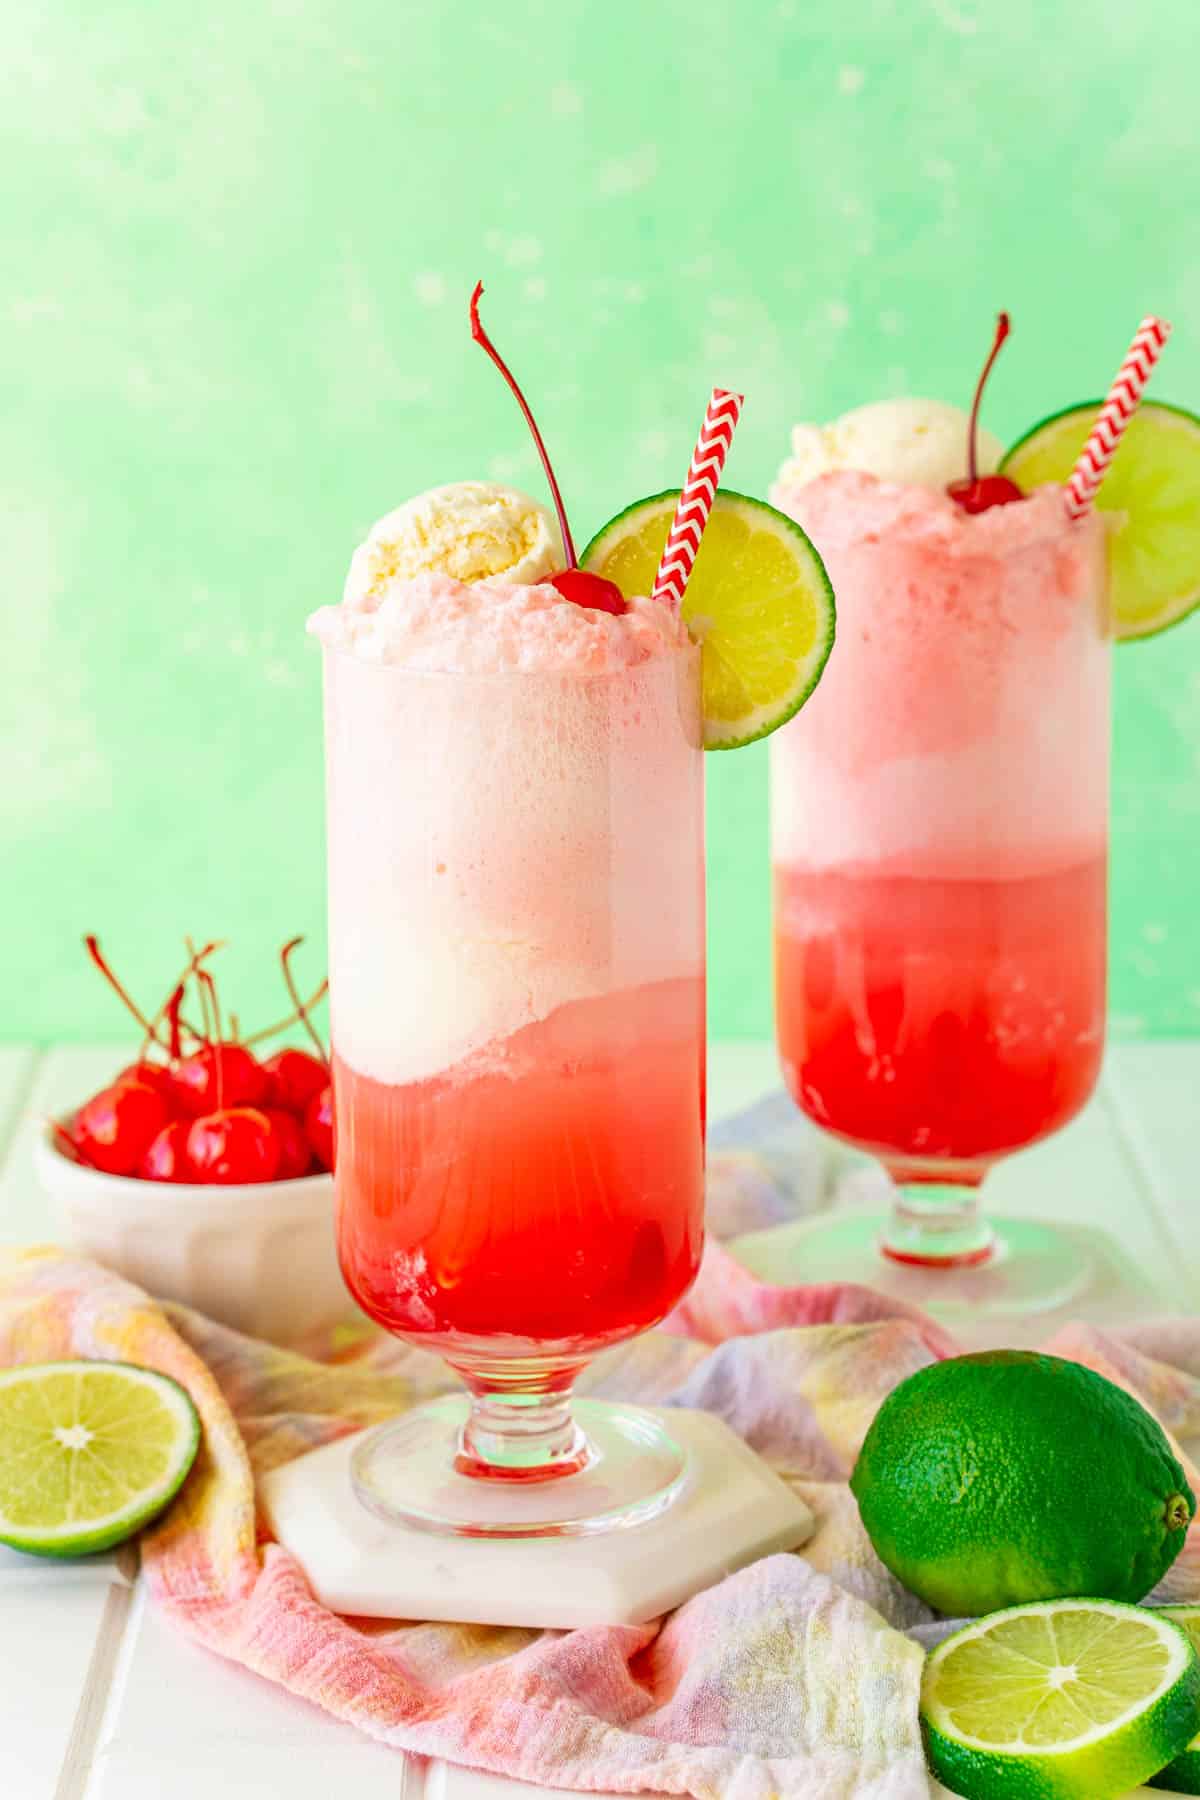 Two glasses of shirley temple floats on white coasters with limes and maraschino cherries around them.